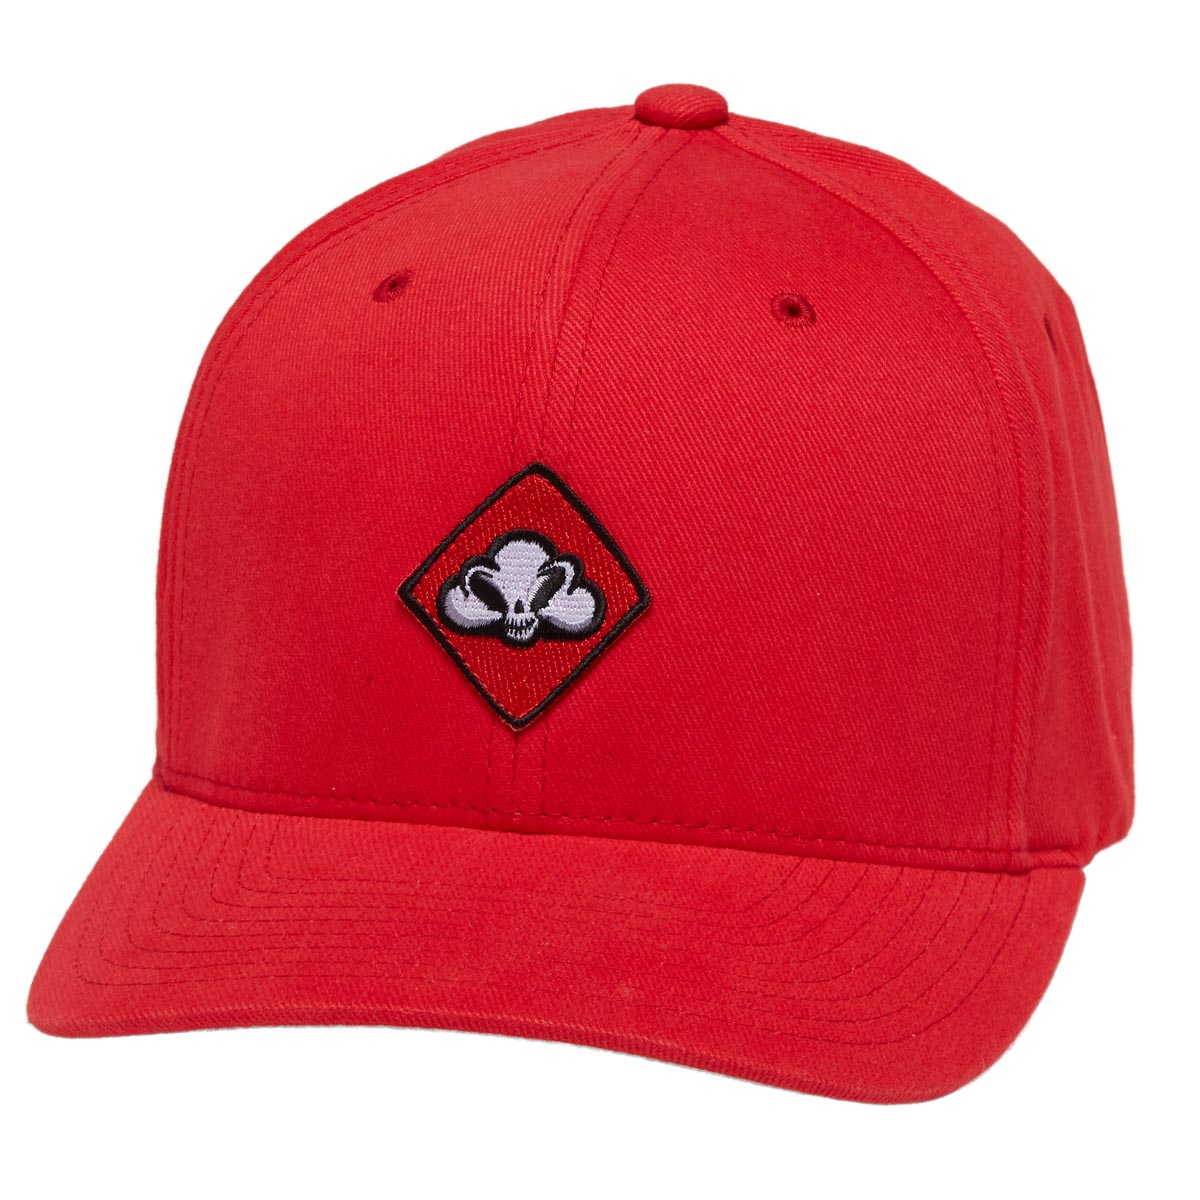 Thank You Reaper Cloud FlexFit Hat - Red image 1